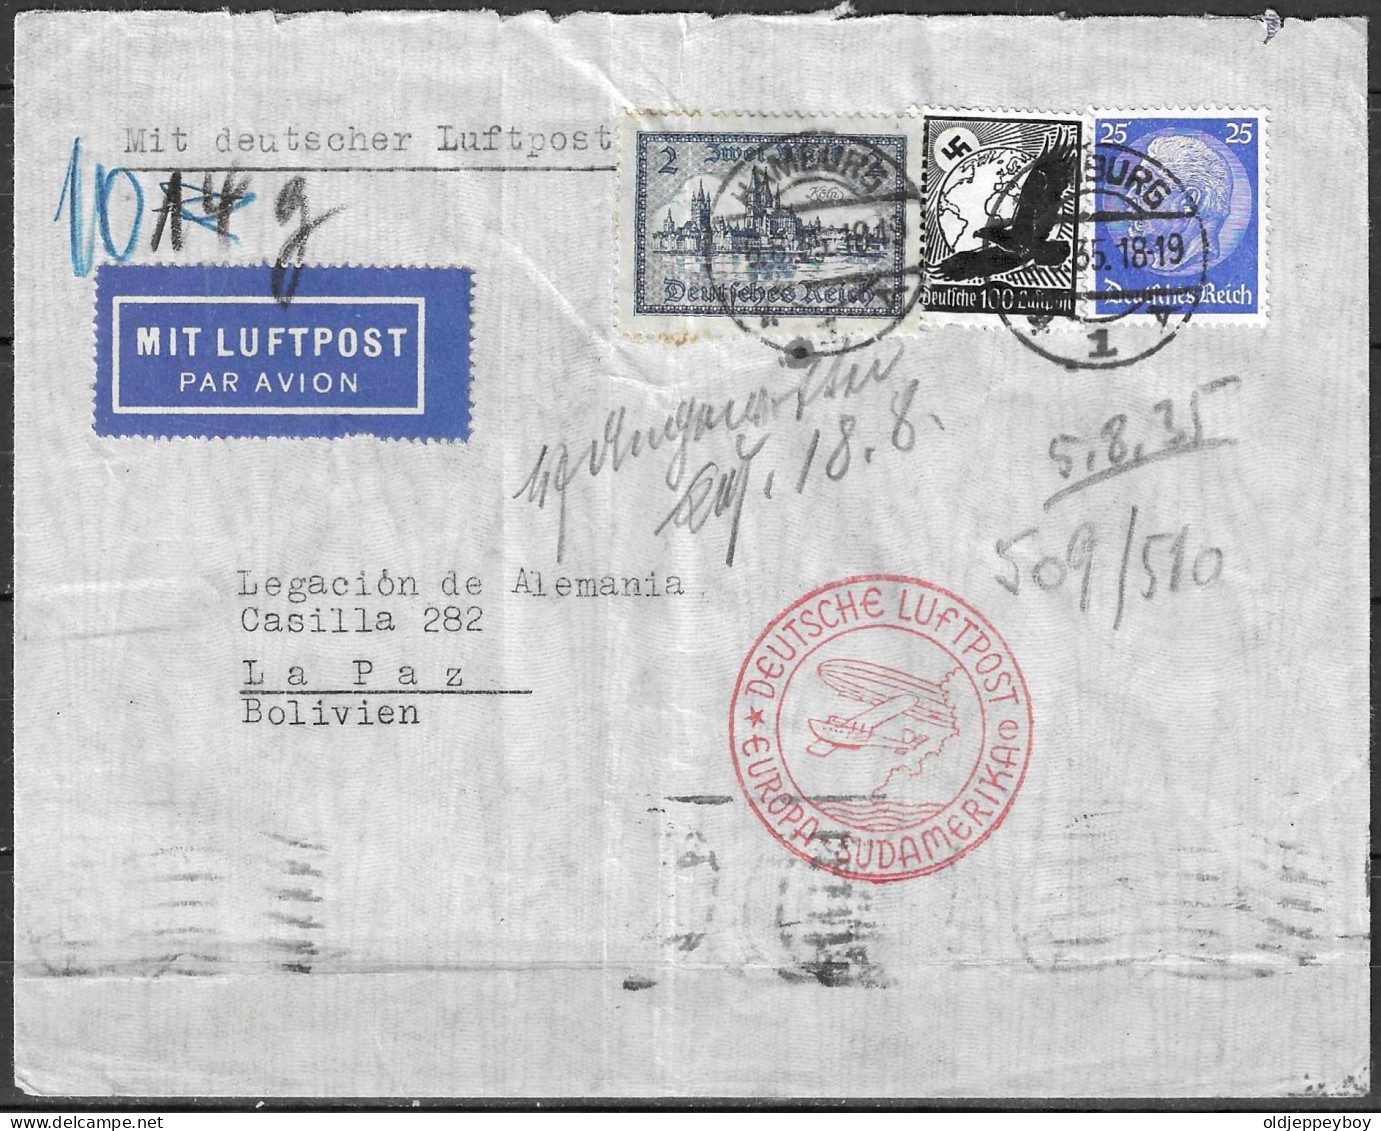 Germany 1935 Airmail Letter By LZ 127 Graf Zeppelin (Europe-South America) From Hamburg To LA PAZ BOLIVIEN BOLIVIA - Zeppeline